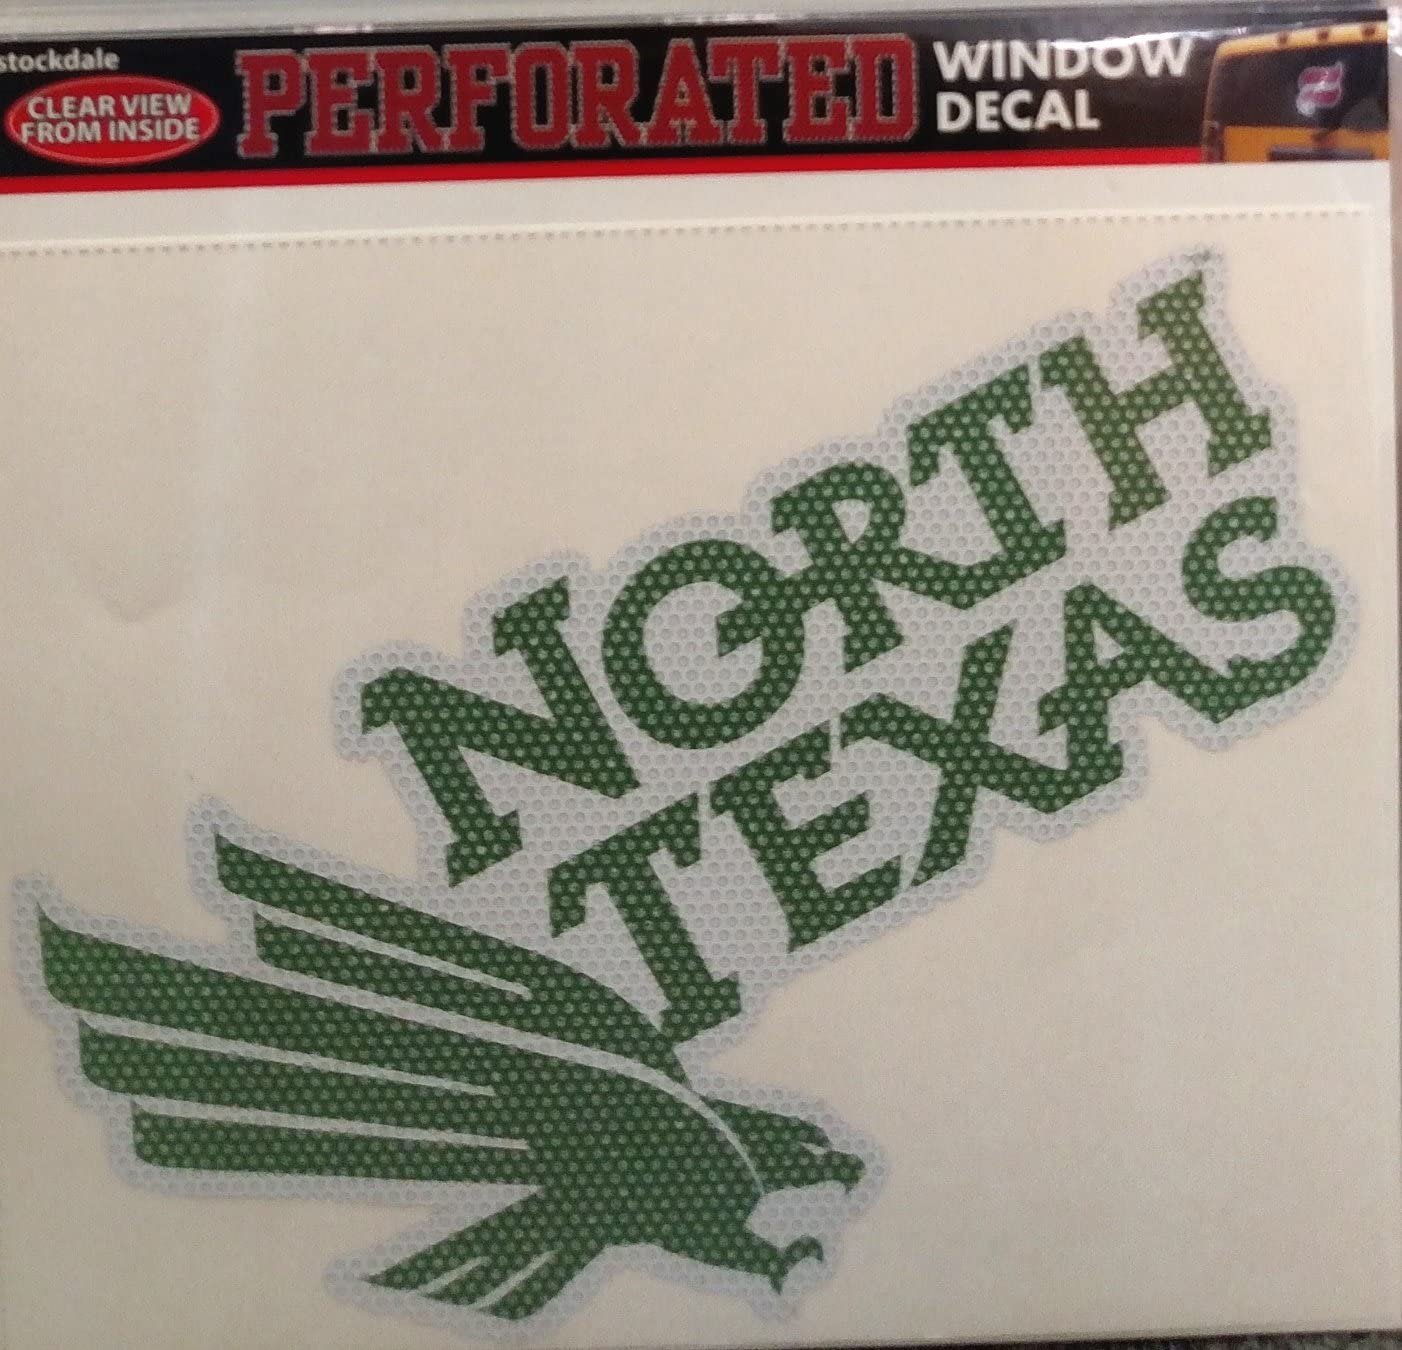 University of North Texas Mean Green 8 Inch Preforated Window Film Decal Sticker, One-Way Vision, Adhesive Backing